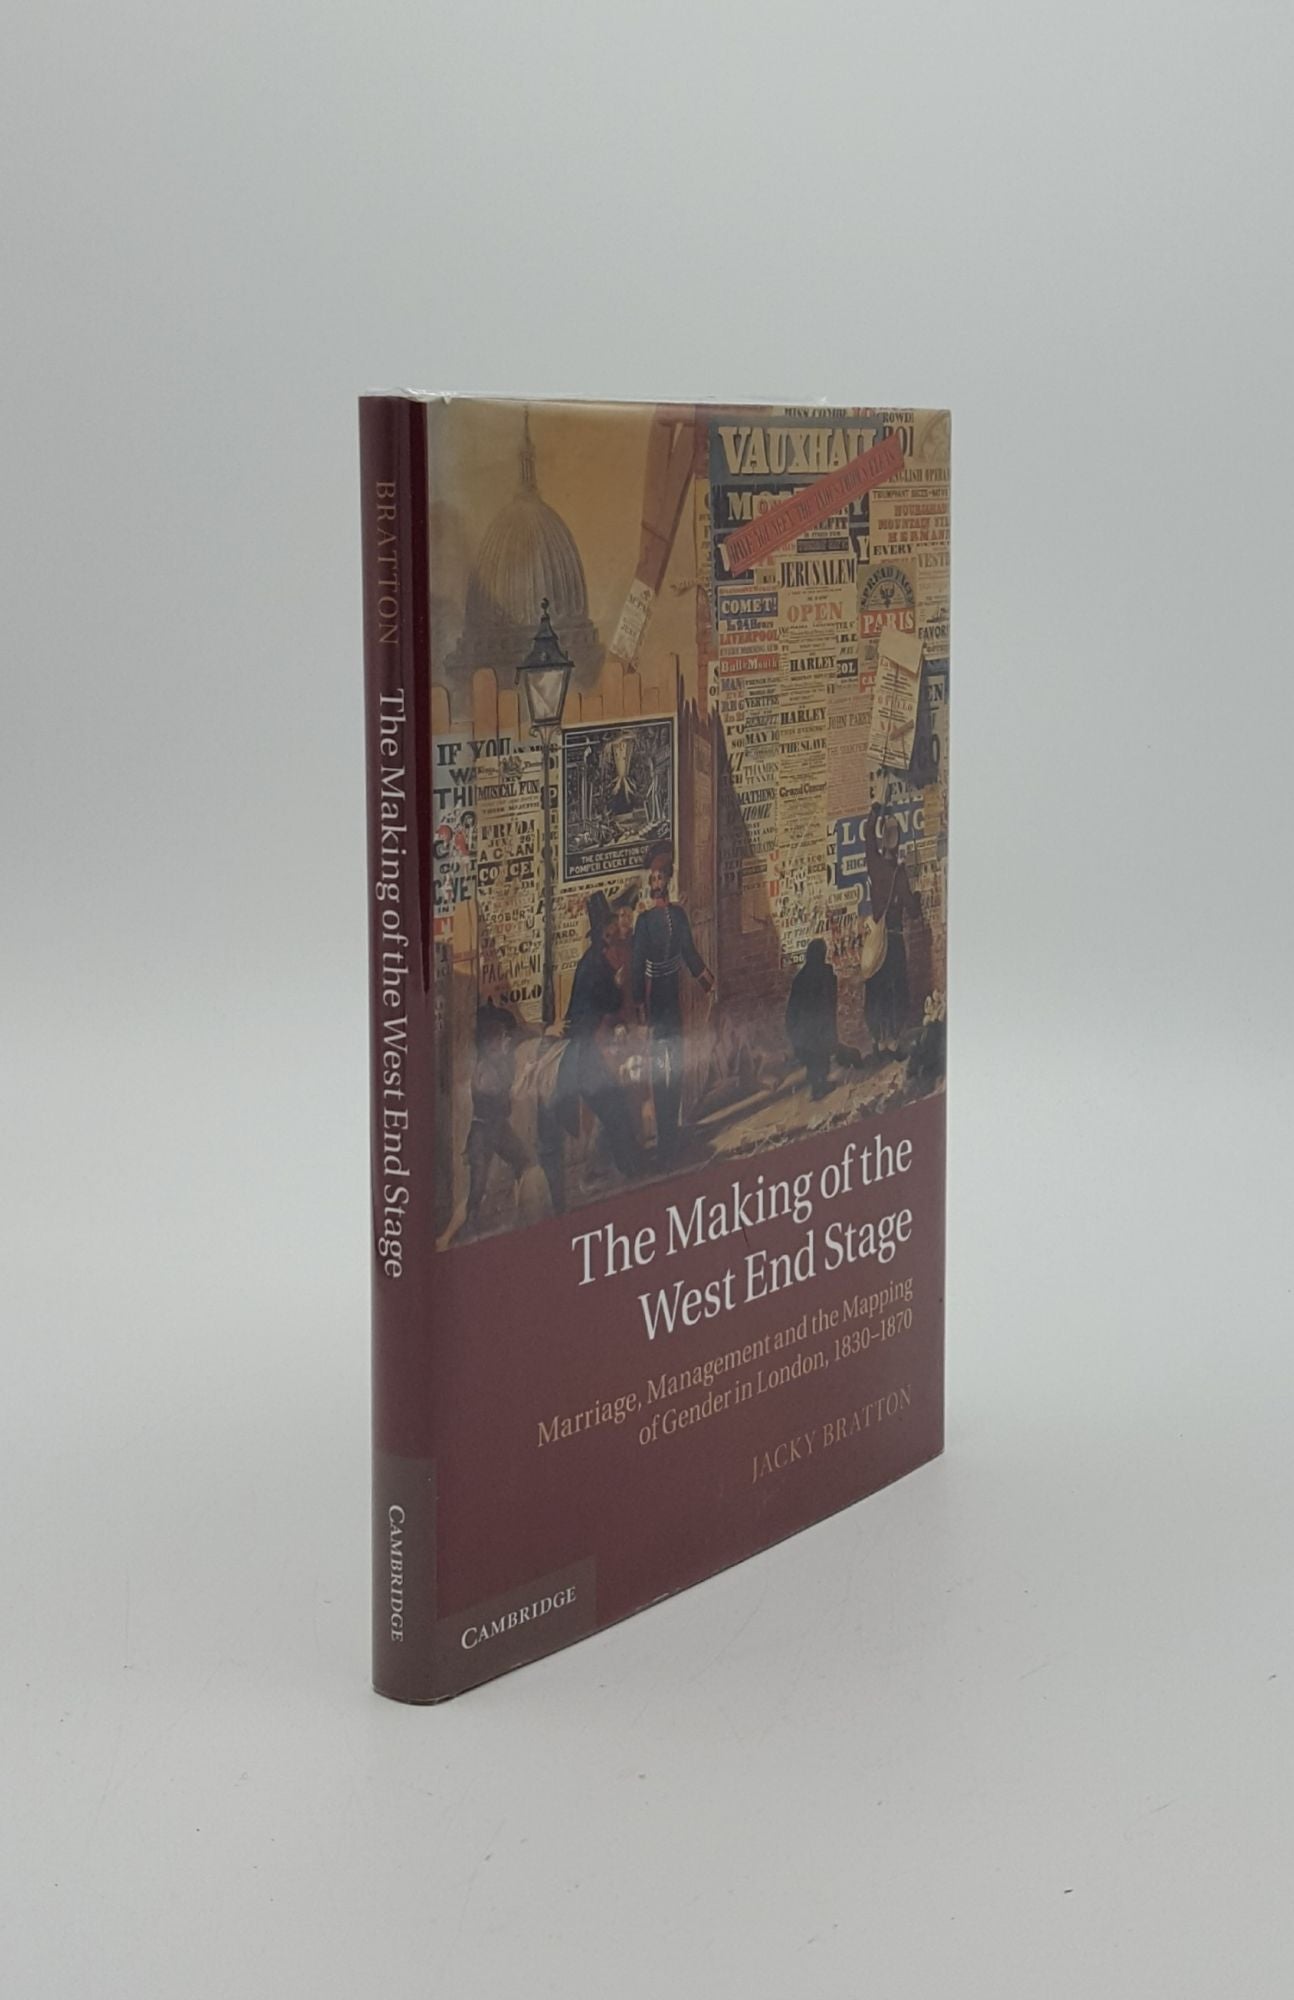 BRATTON Jacky - The Making of the West End Stage Marriage Management and the Mapping of Gender in London 1830-1870